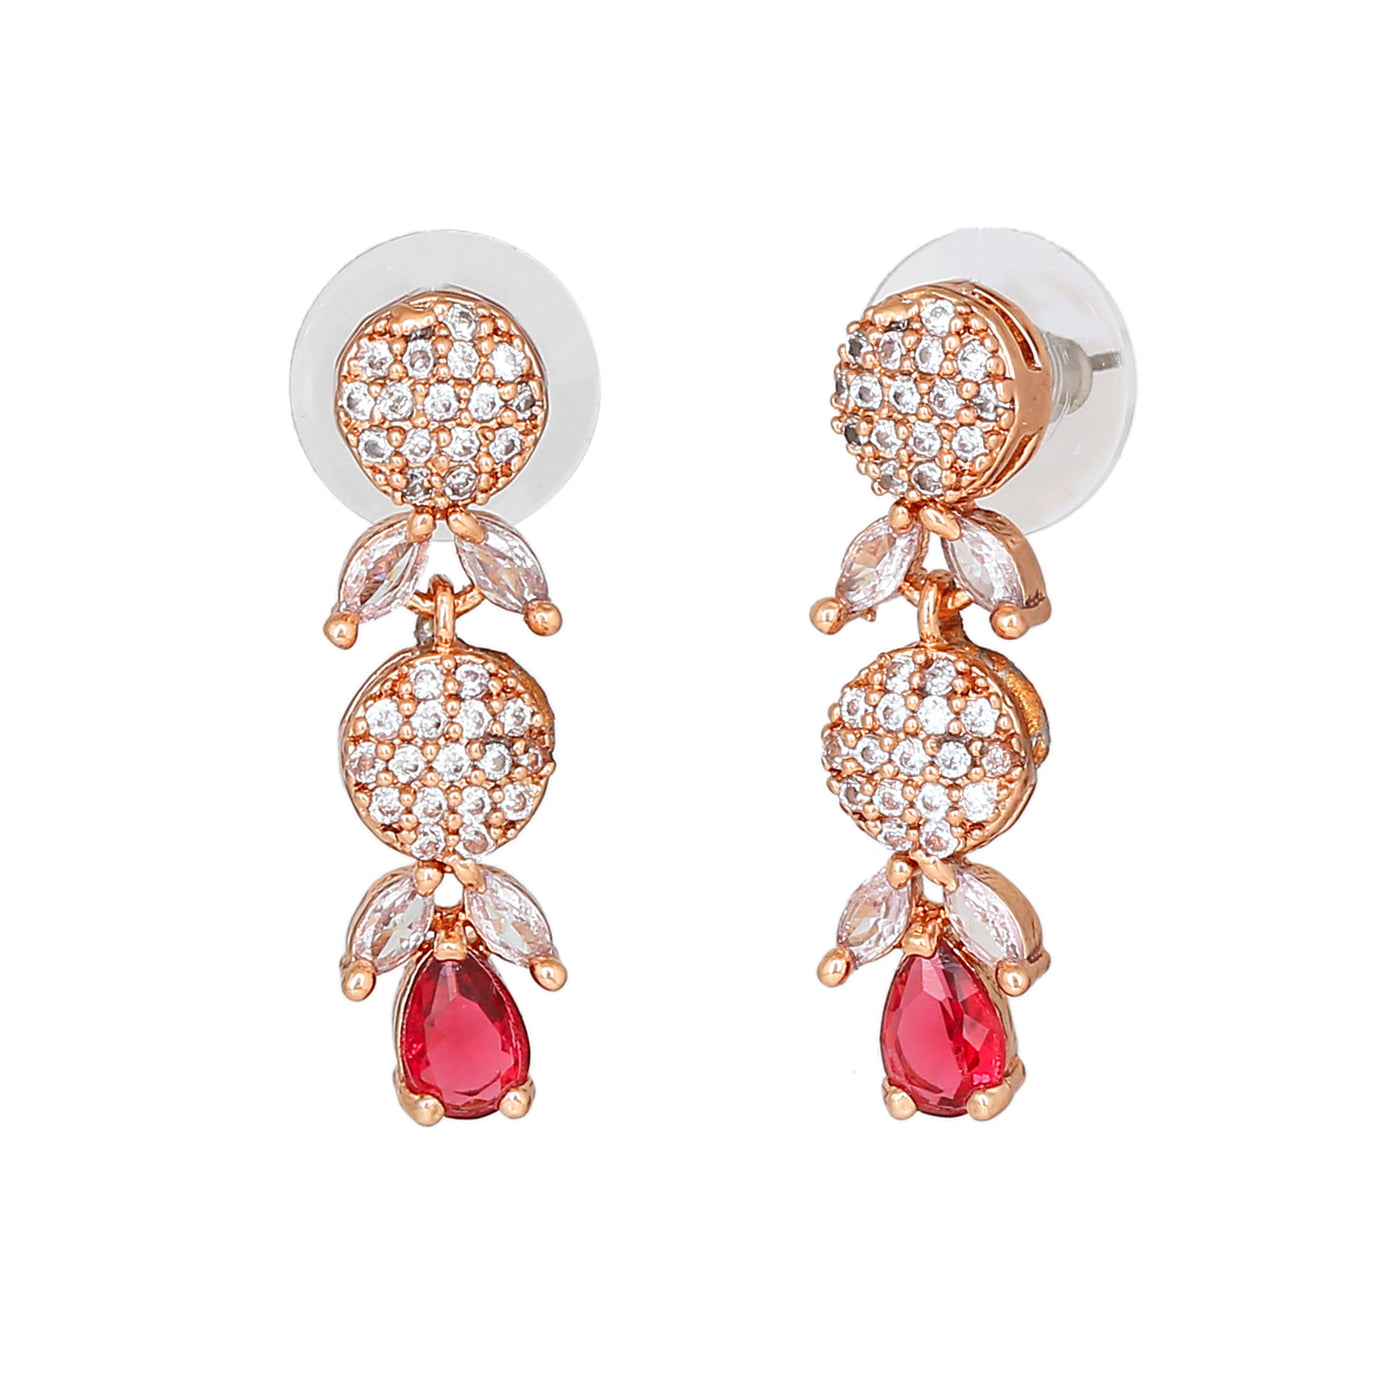 Estele Rose Gold Plated CZ Twinkling Drop Earrings with Tourmaline Pink Stones for Women